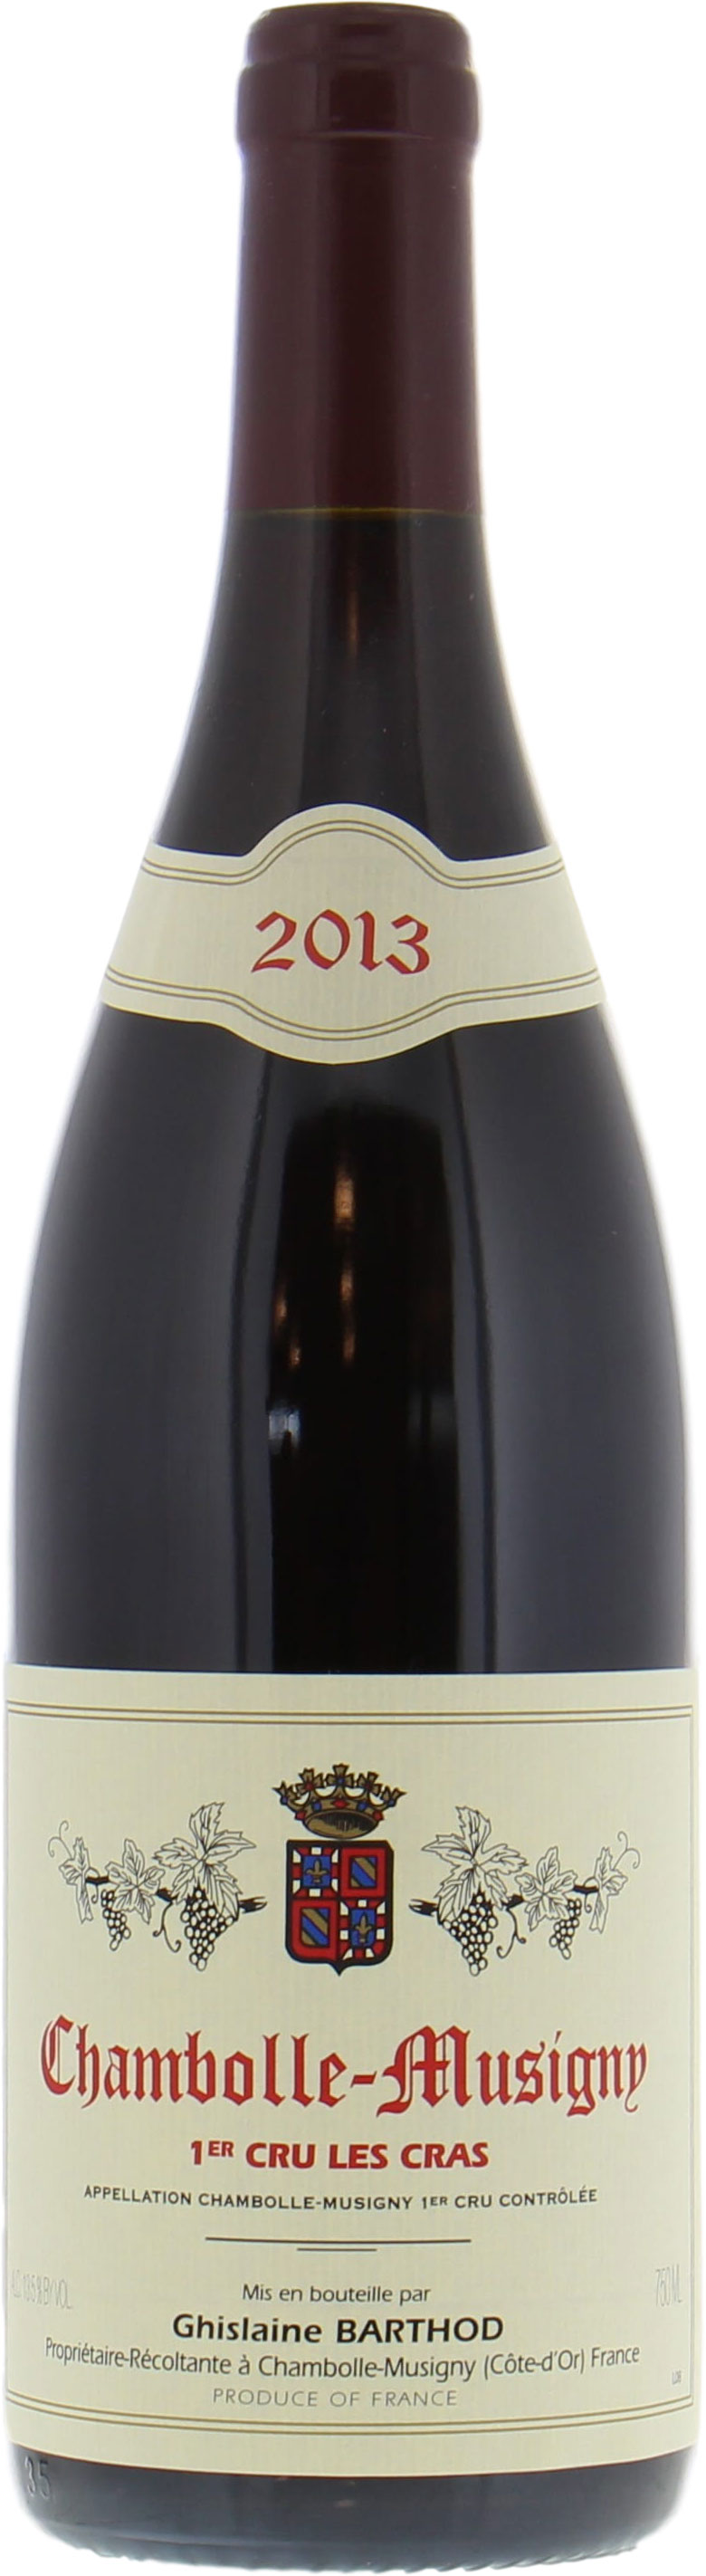 Ghislaine Barthod - Chambolle Musigny les Cras 2013 Perfect